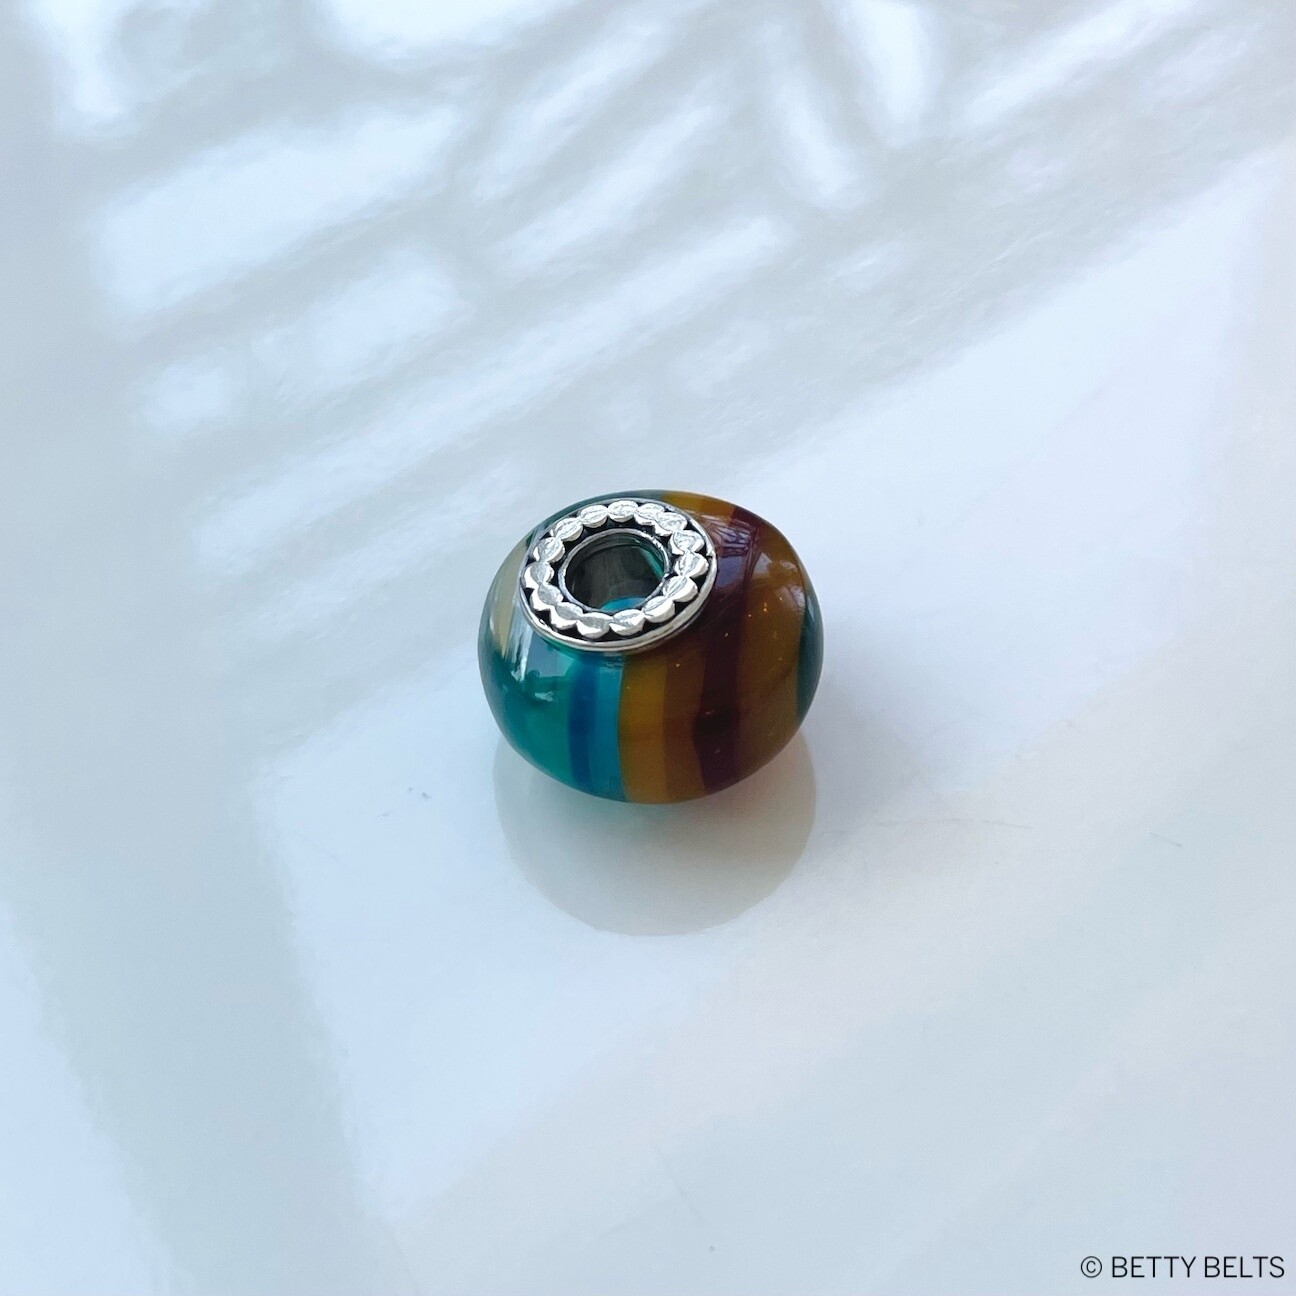 Upcycled Surf Resin Bead Charm